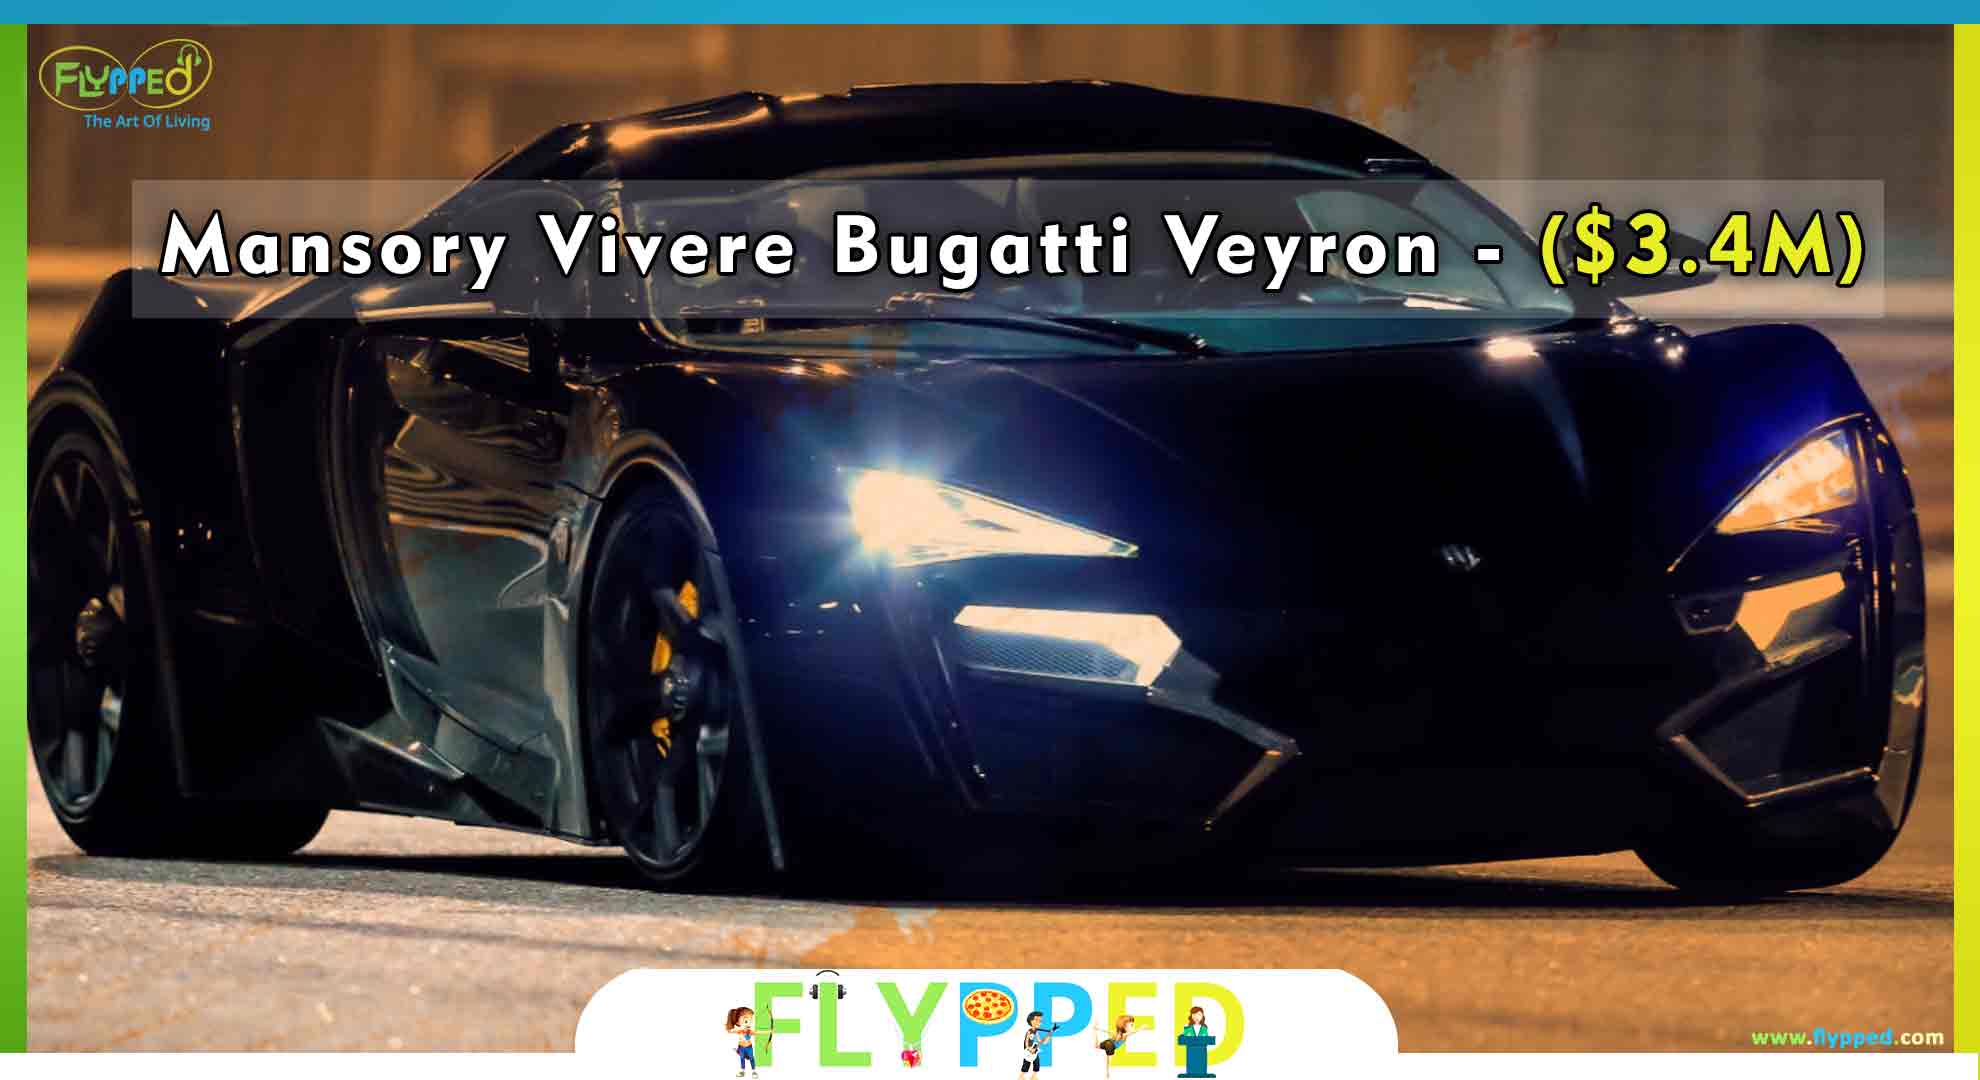 Top-10-most-expensive-cars-in-the-world-Mansory-Vivere-Bugatti-Veyron